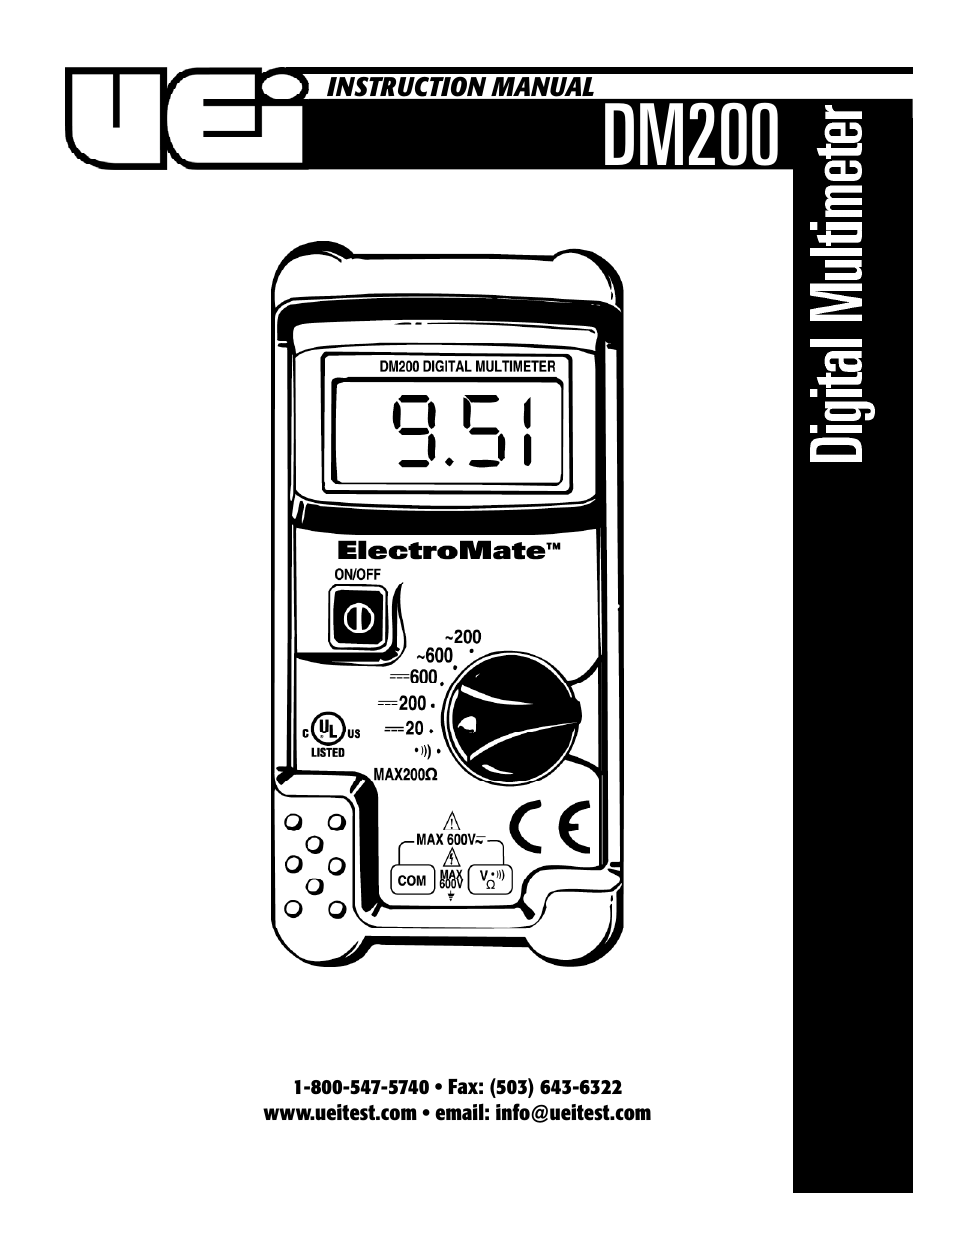 DM200 - DISCONTINUED